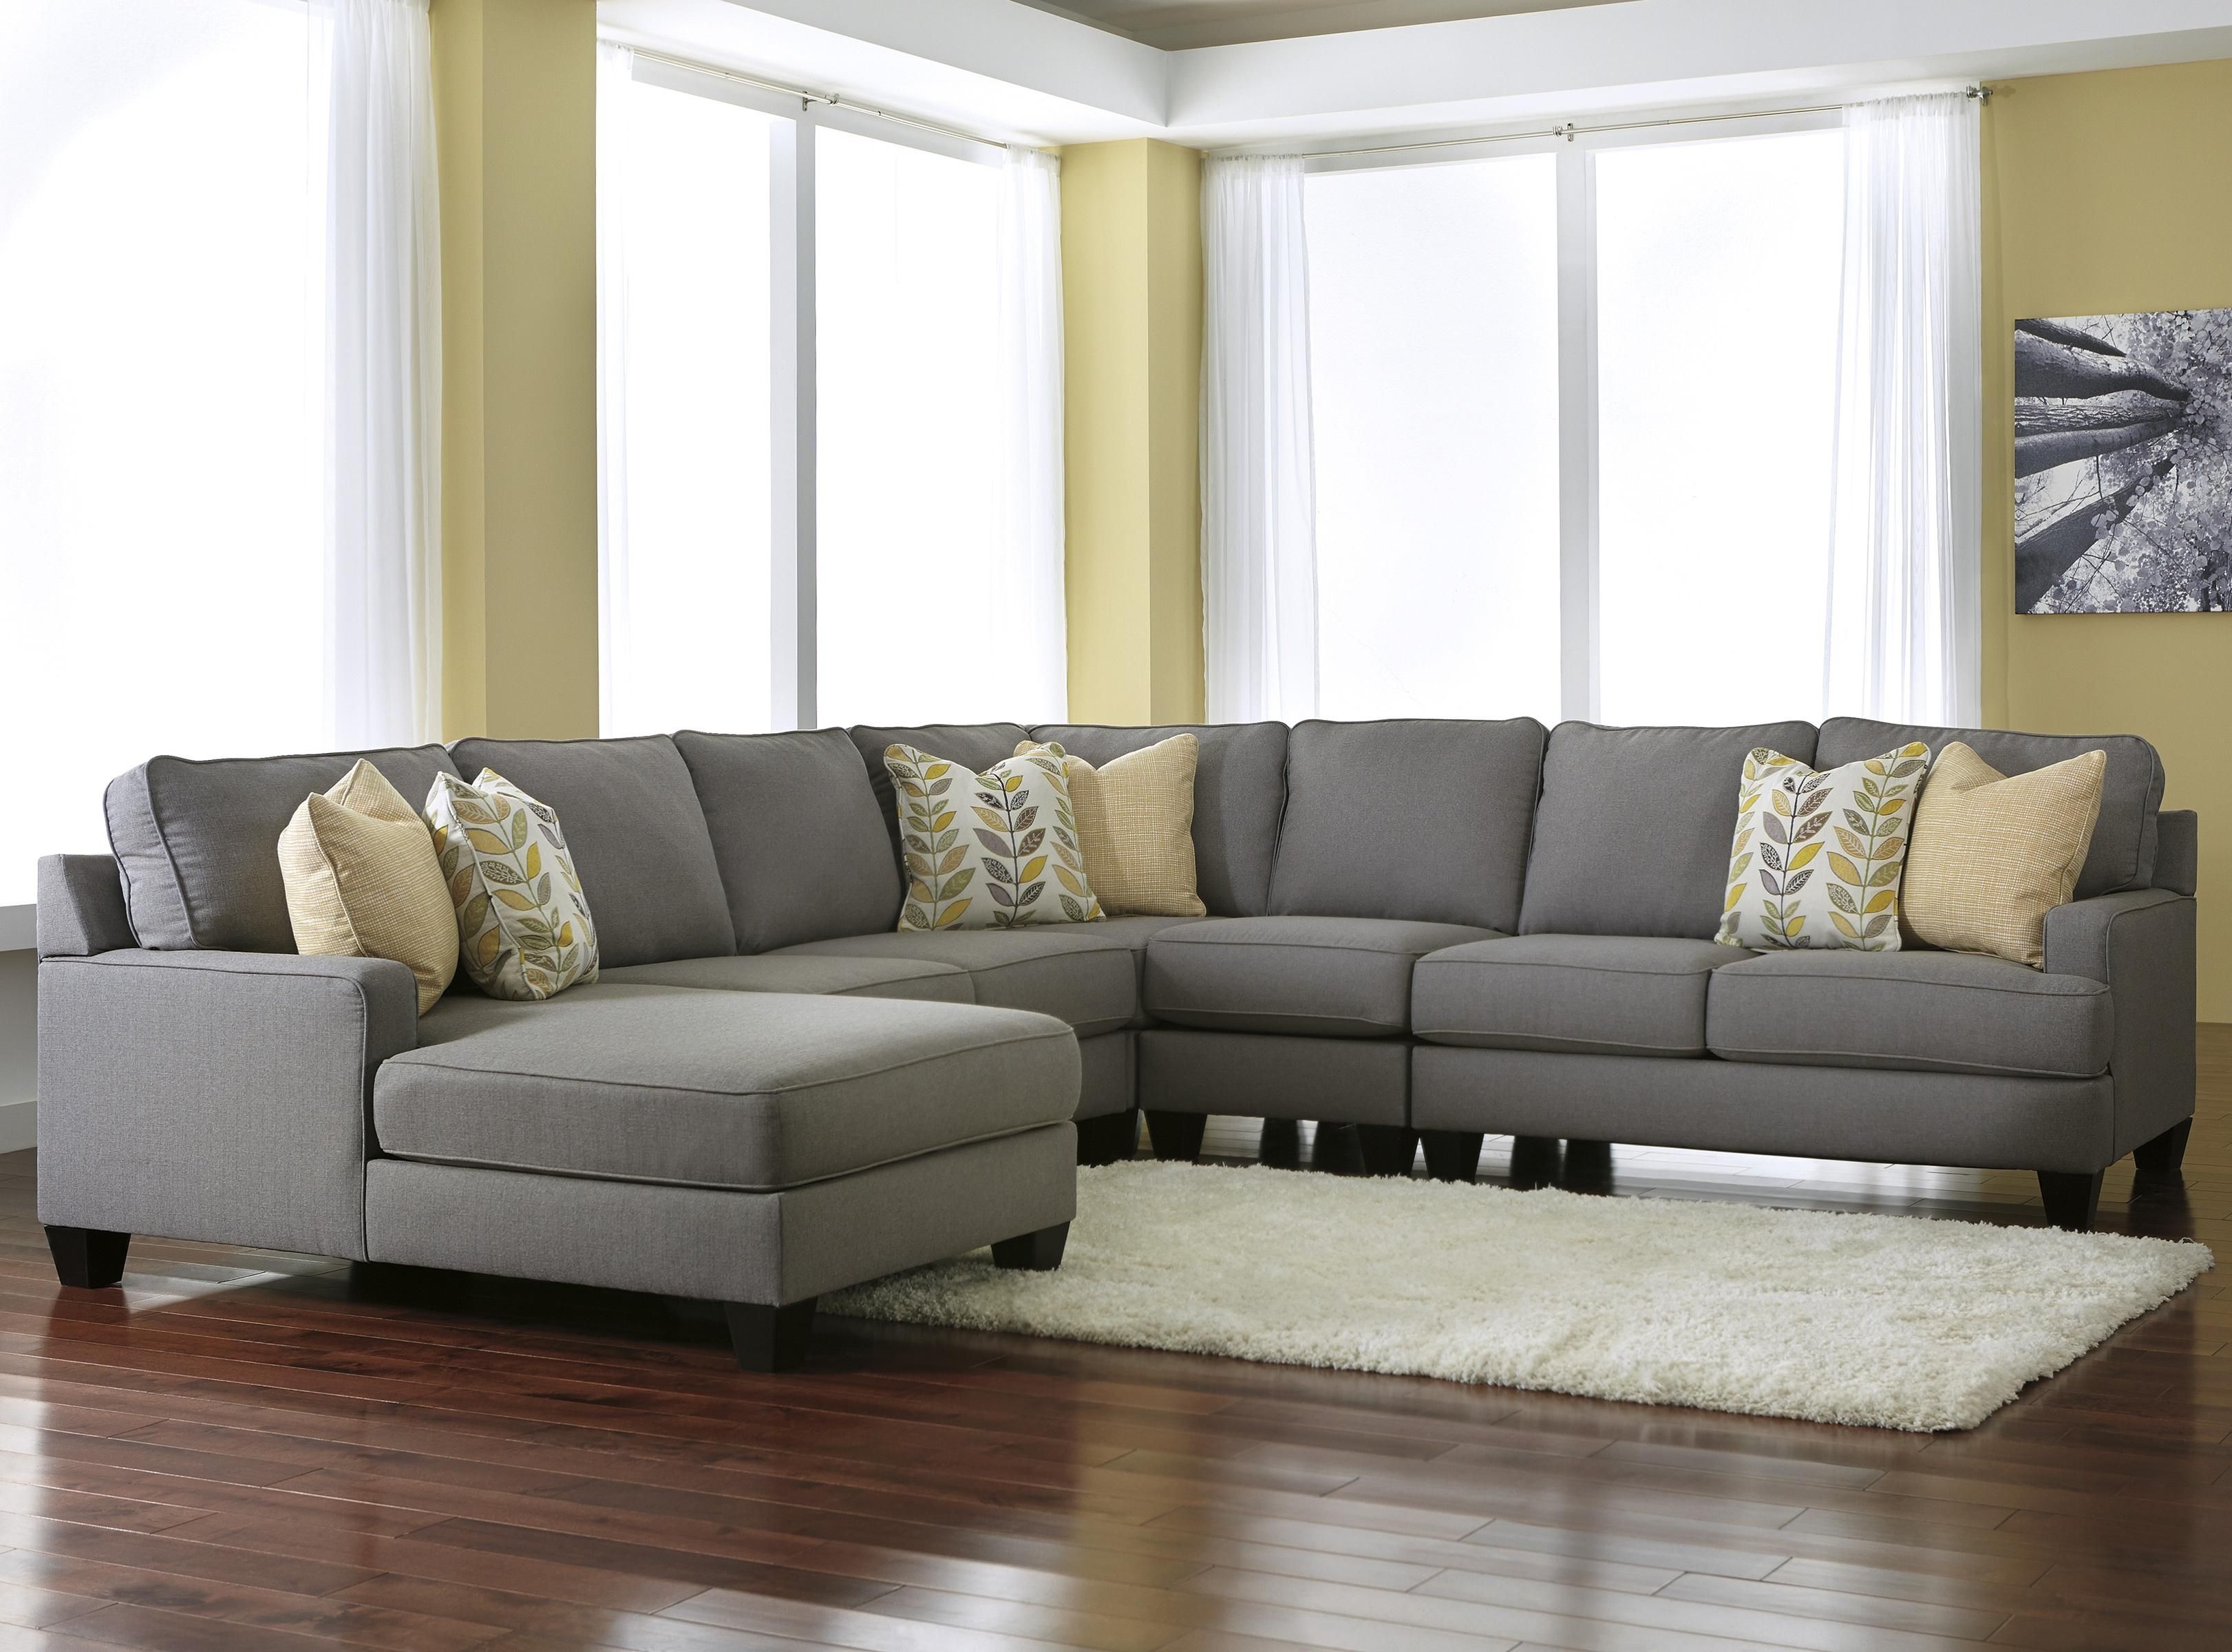 Modern 5 Piece Sectional Sofa With Left Chaise & Reversible Seat Regarding Lancaster Pa Sectional Sofas (View 6 of 10)